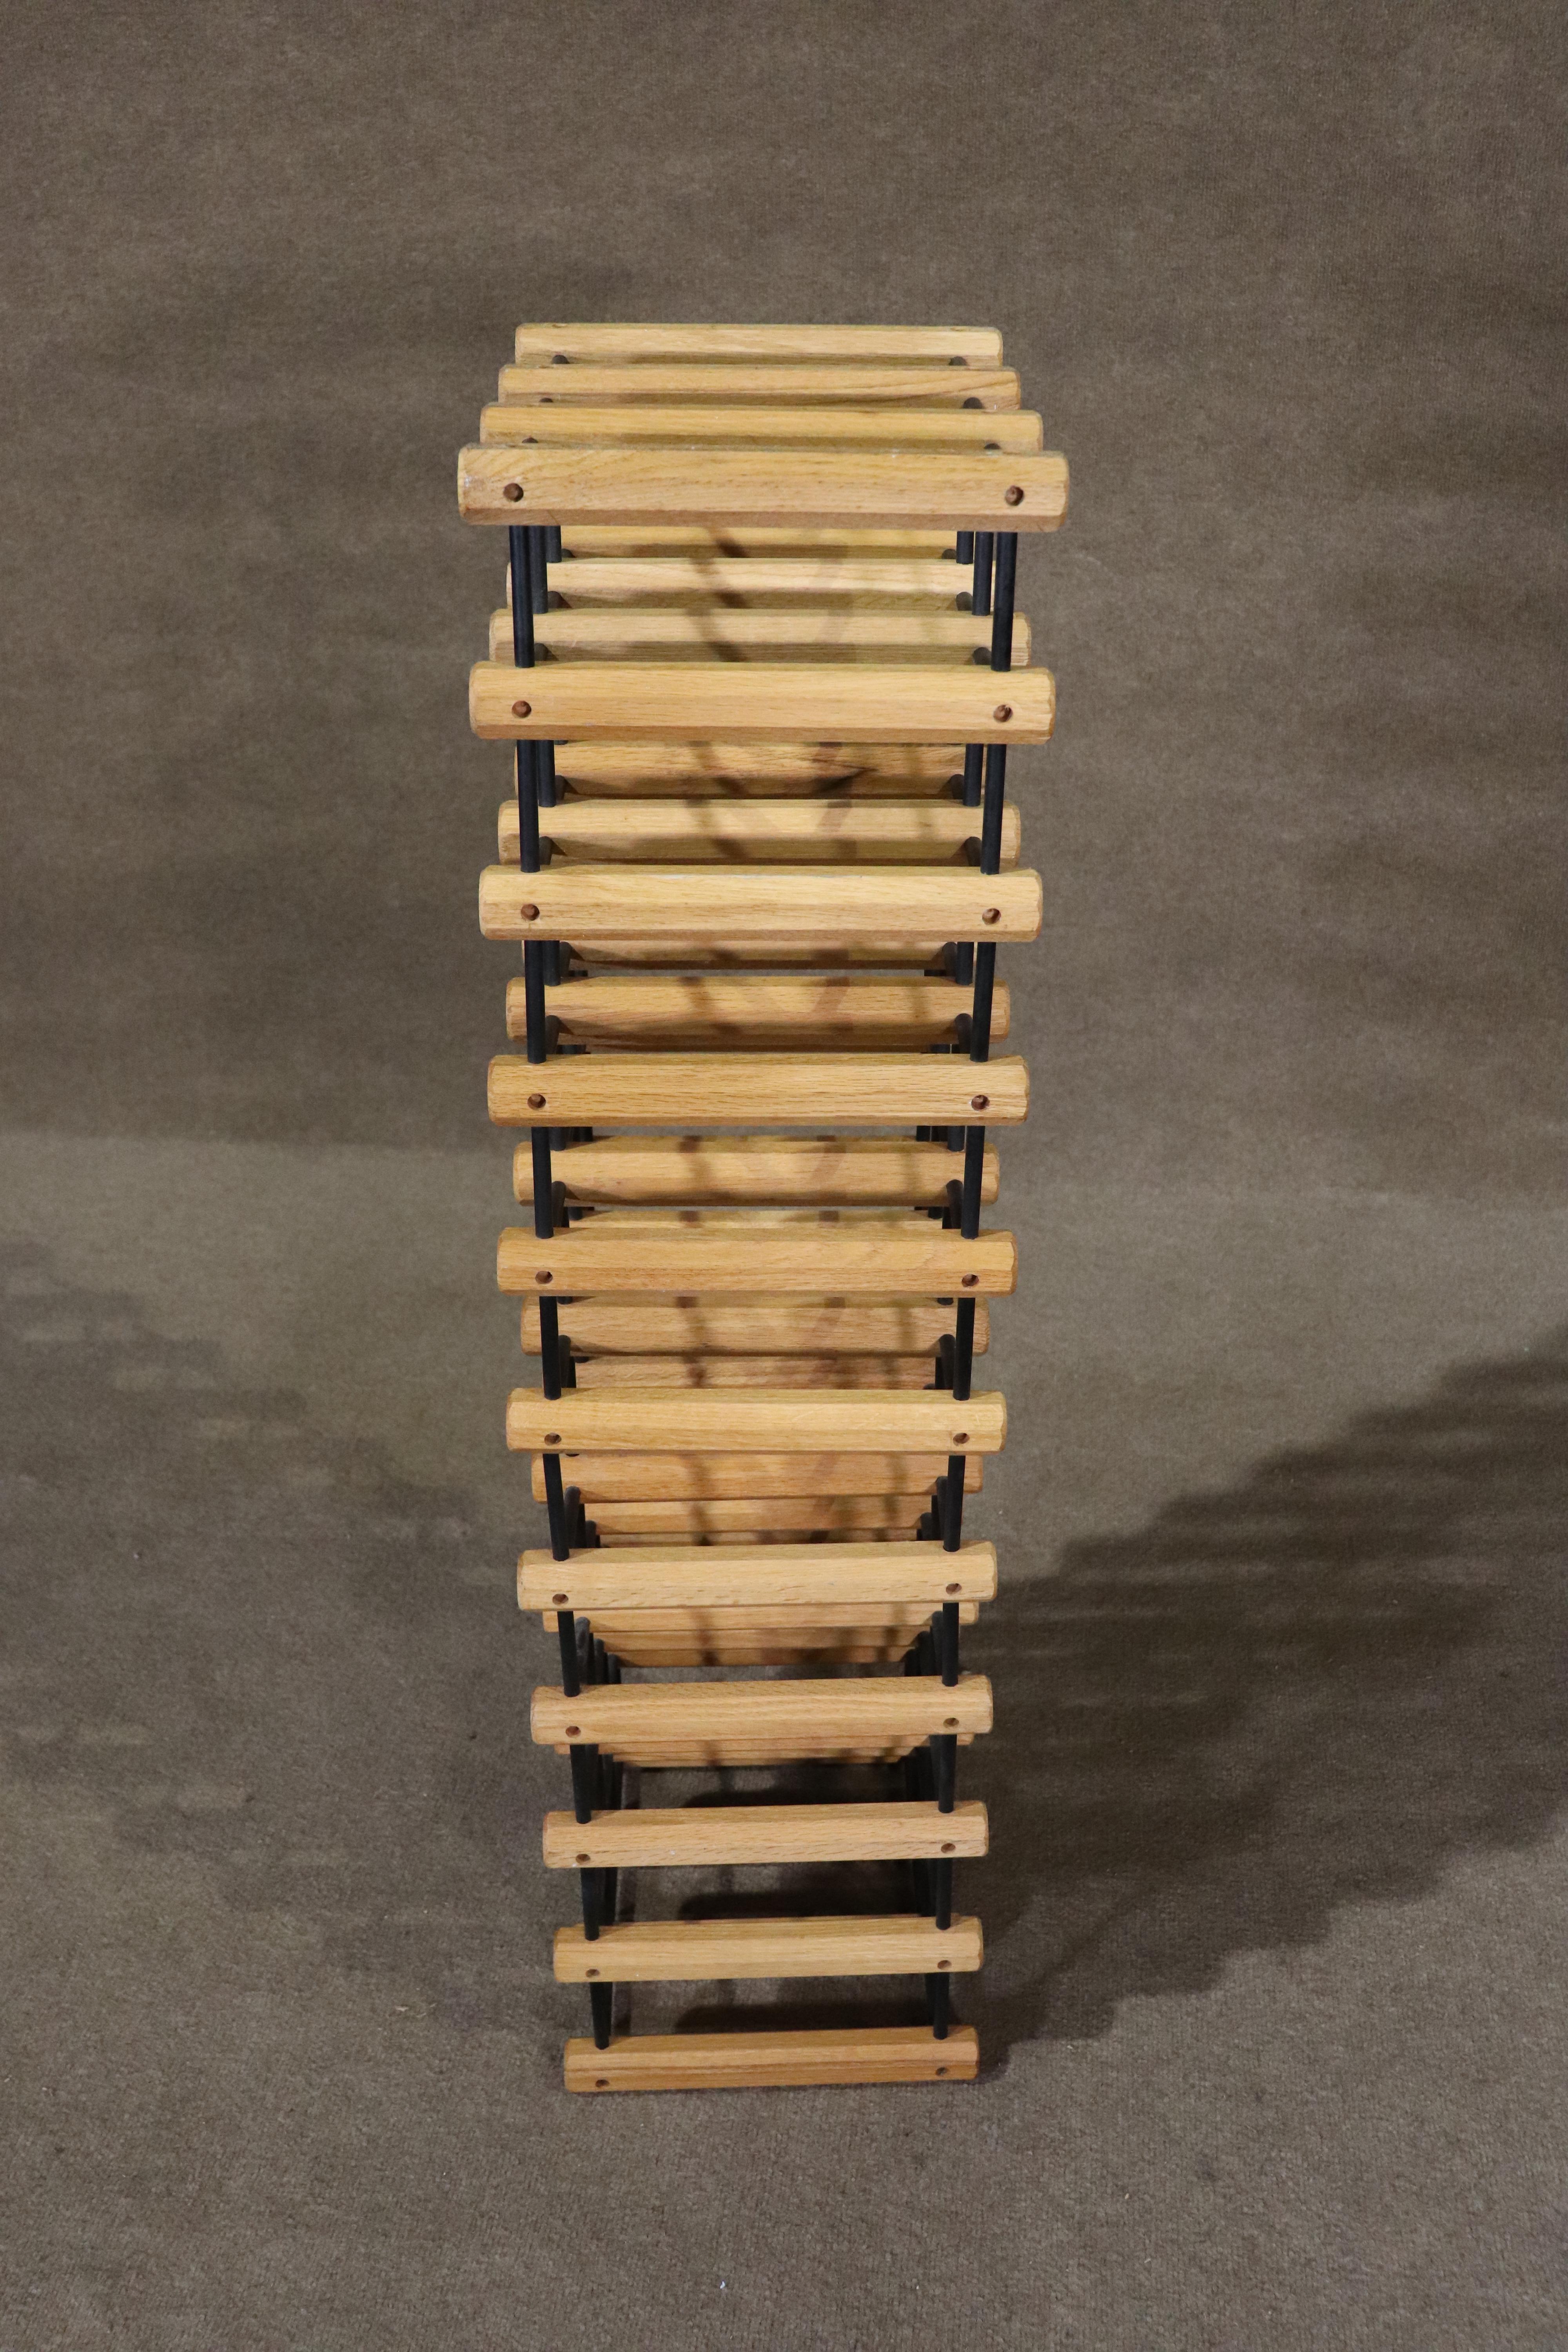 Solid wood pegs with connecting black dowels make up this 3.5 foot tall rack. Holding up to 30 bottles, vertically or horizontally.
Please confirm location NY or NJ